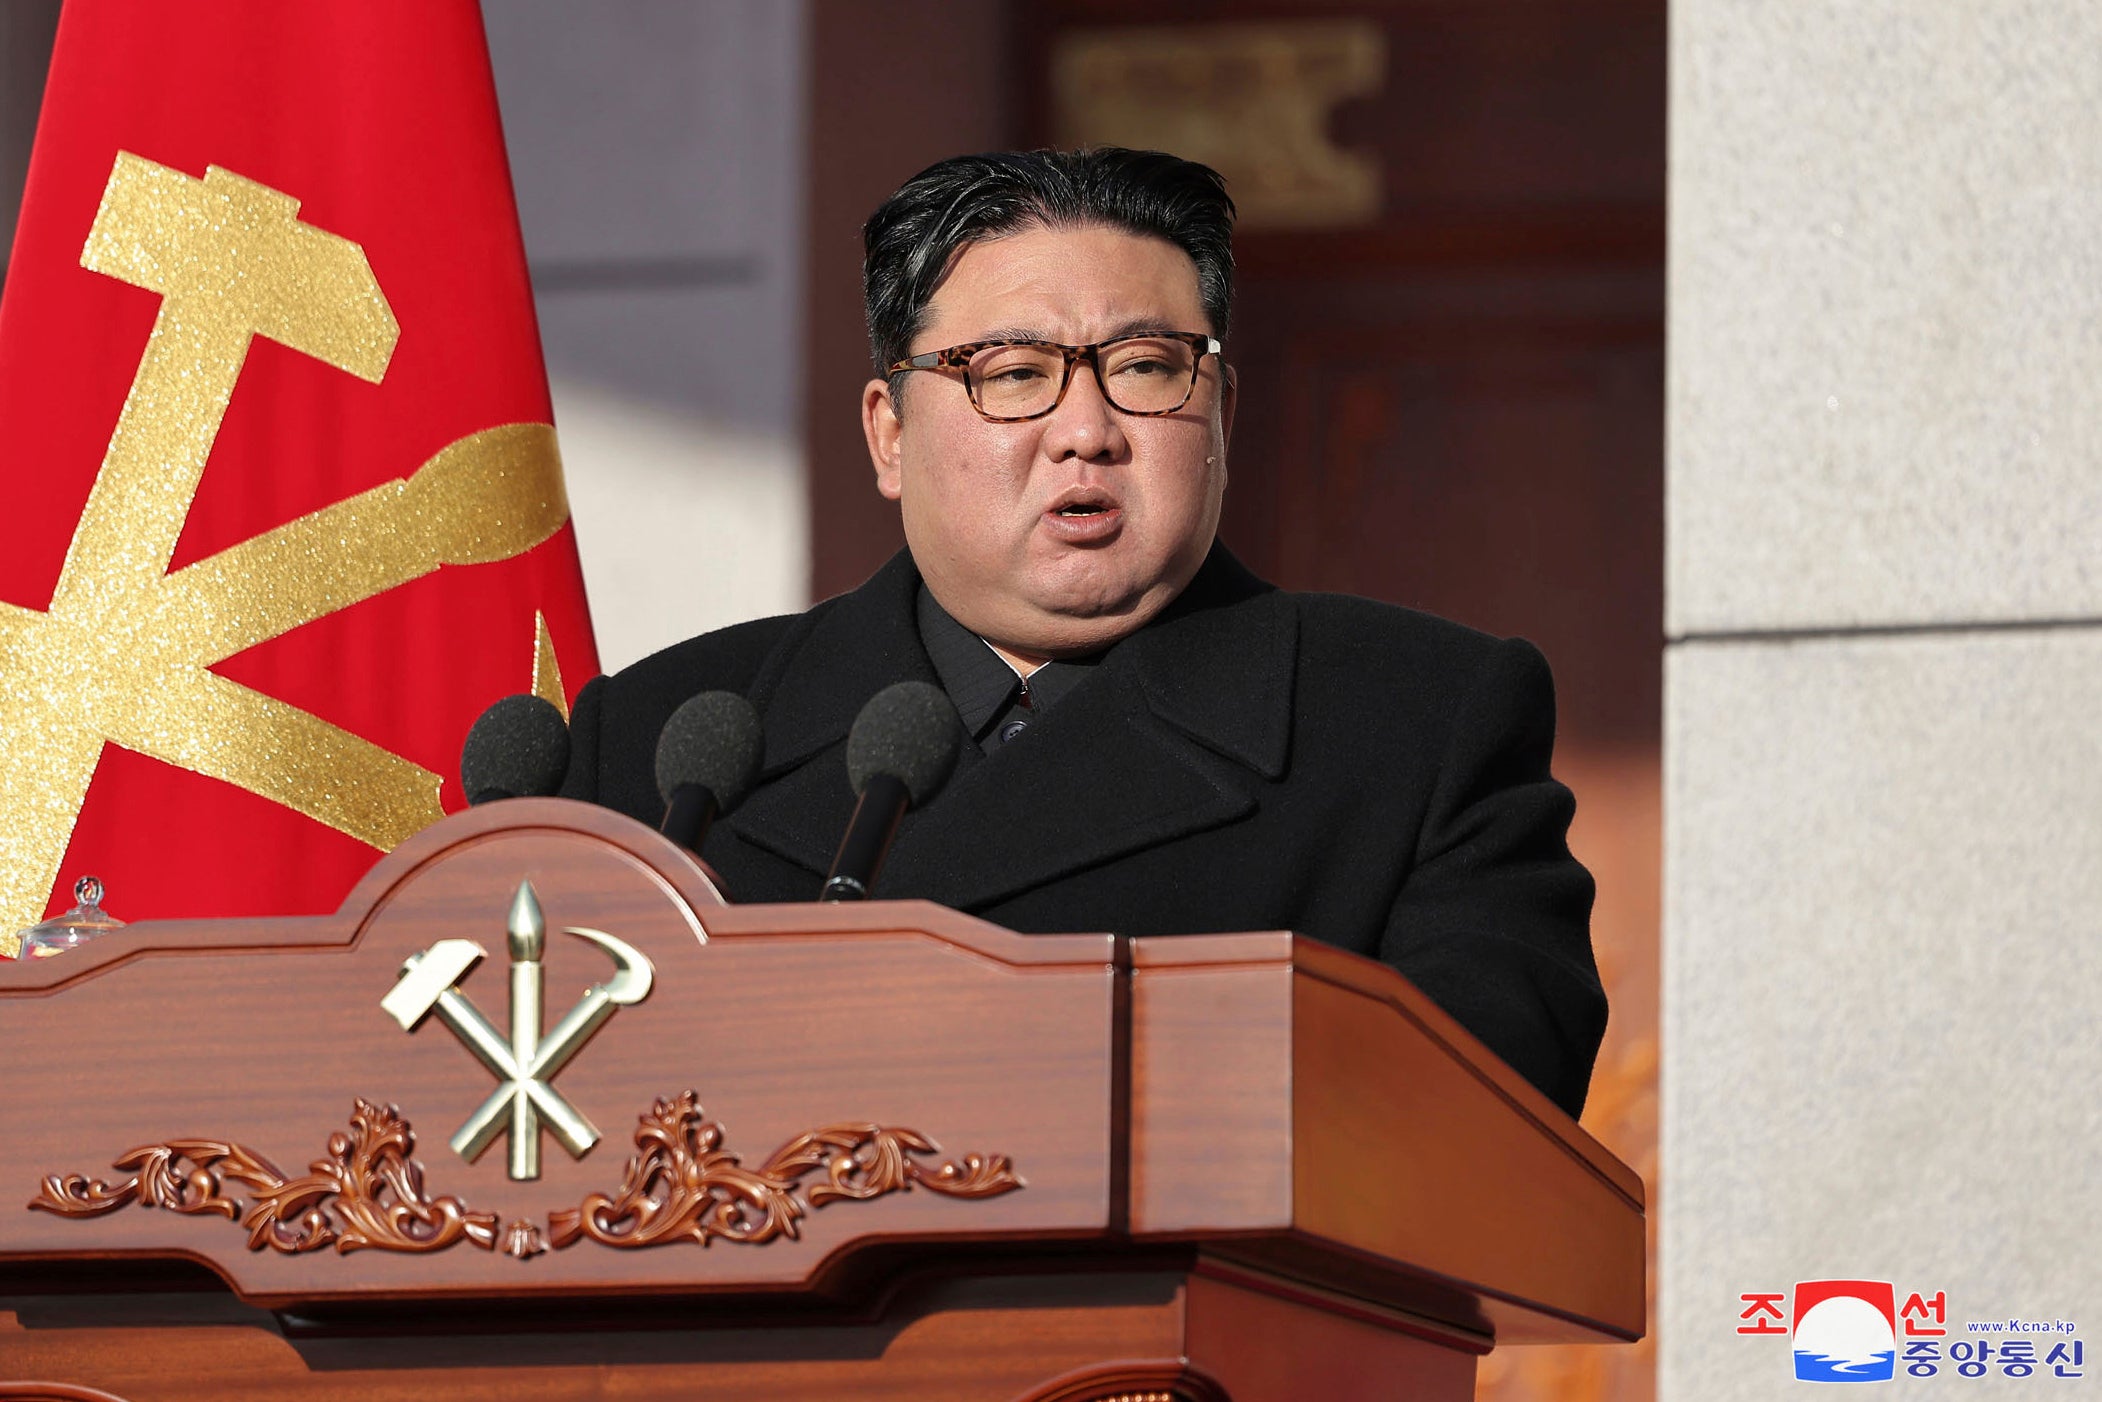 In this photo provided by the North Korean government, its leader Kim Jong Un speaks during an event